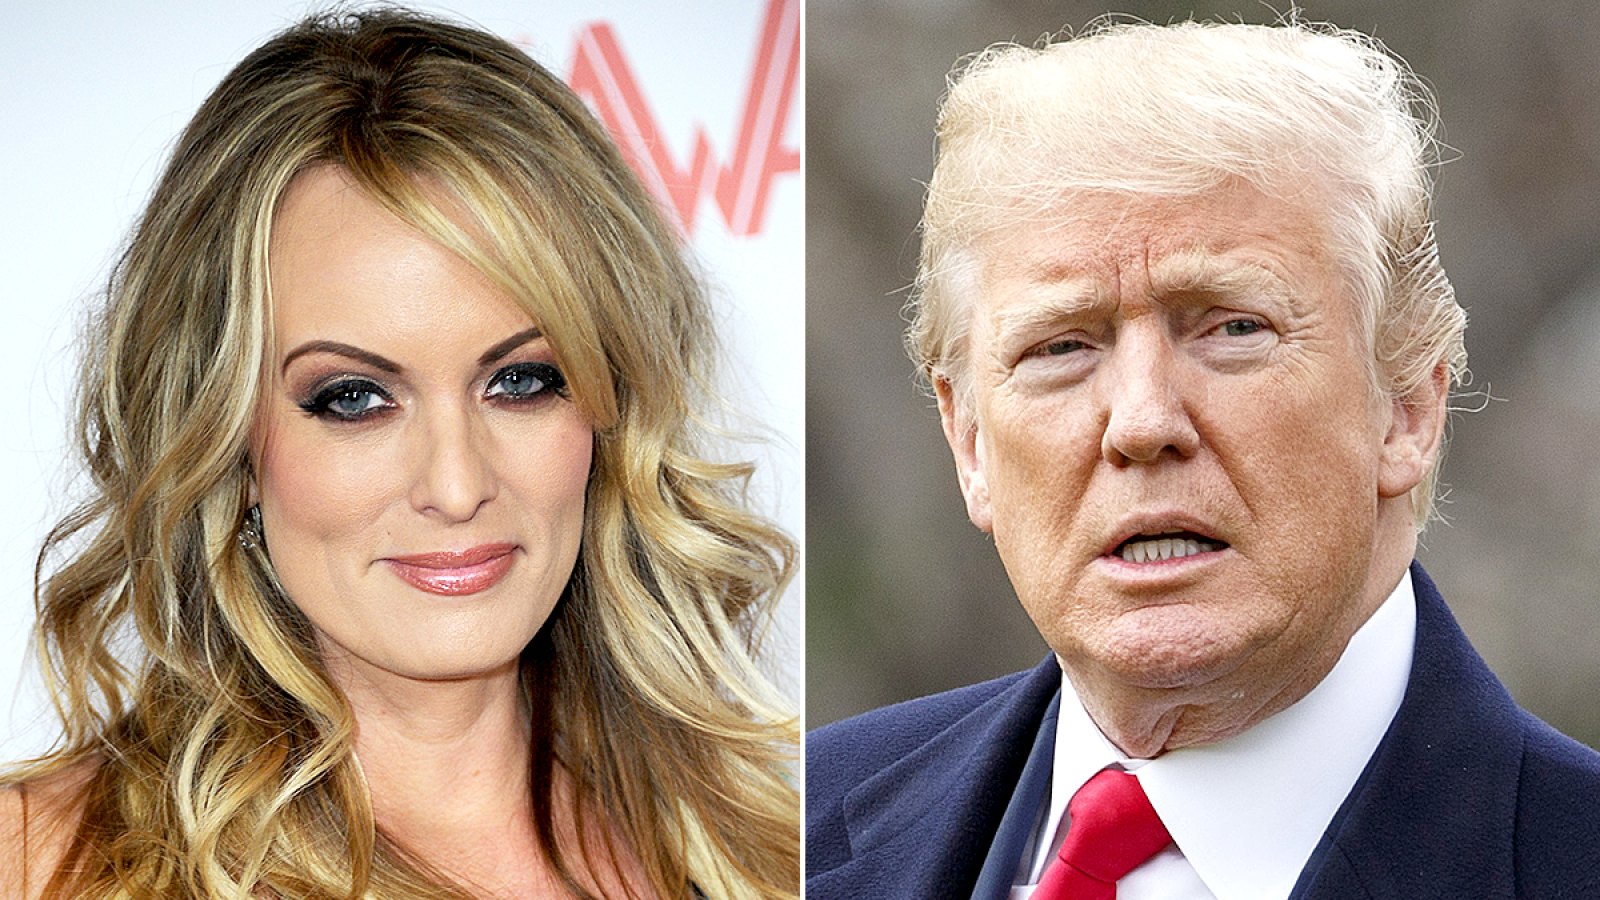 Stormy-Daniels-Speaks-Out-About-‘Goofy’-Donald-Trump